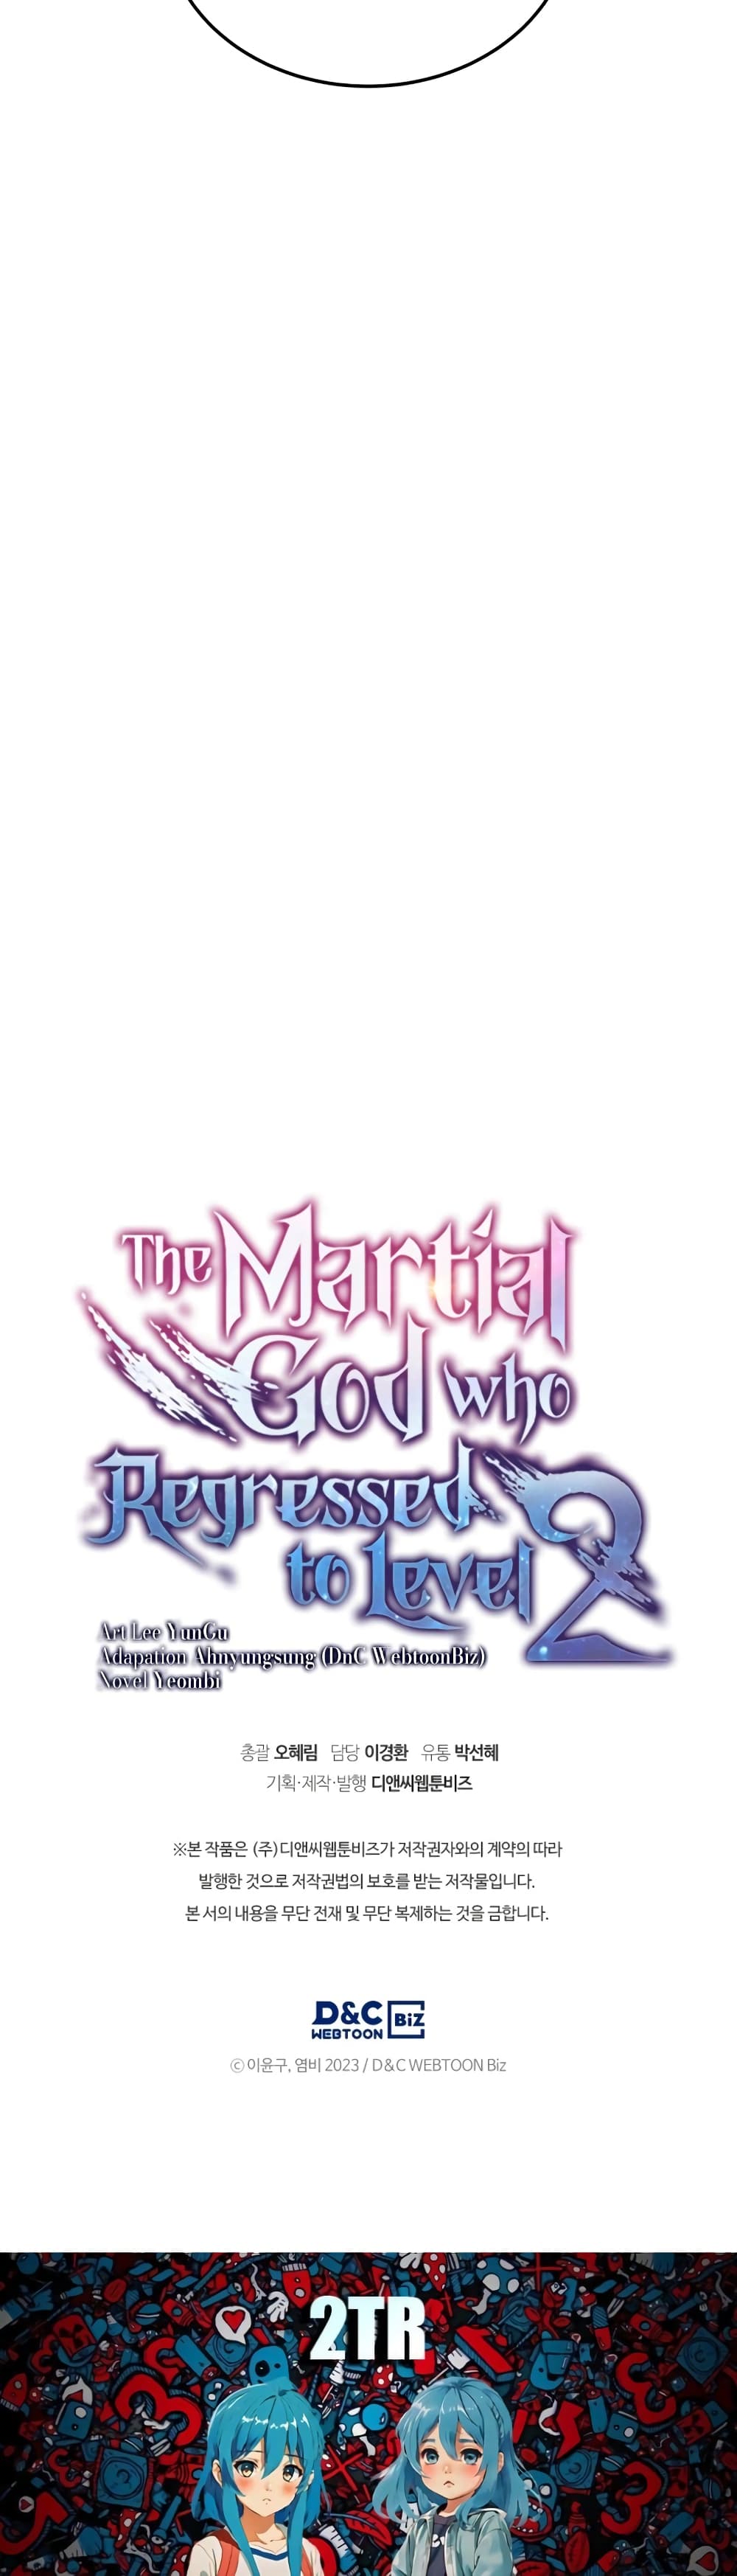 Martial God Regressed to Level 2 13-13